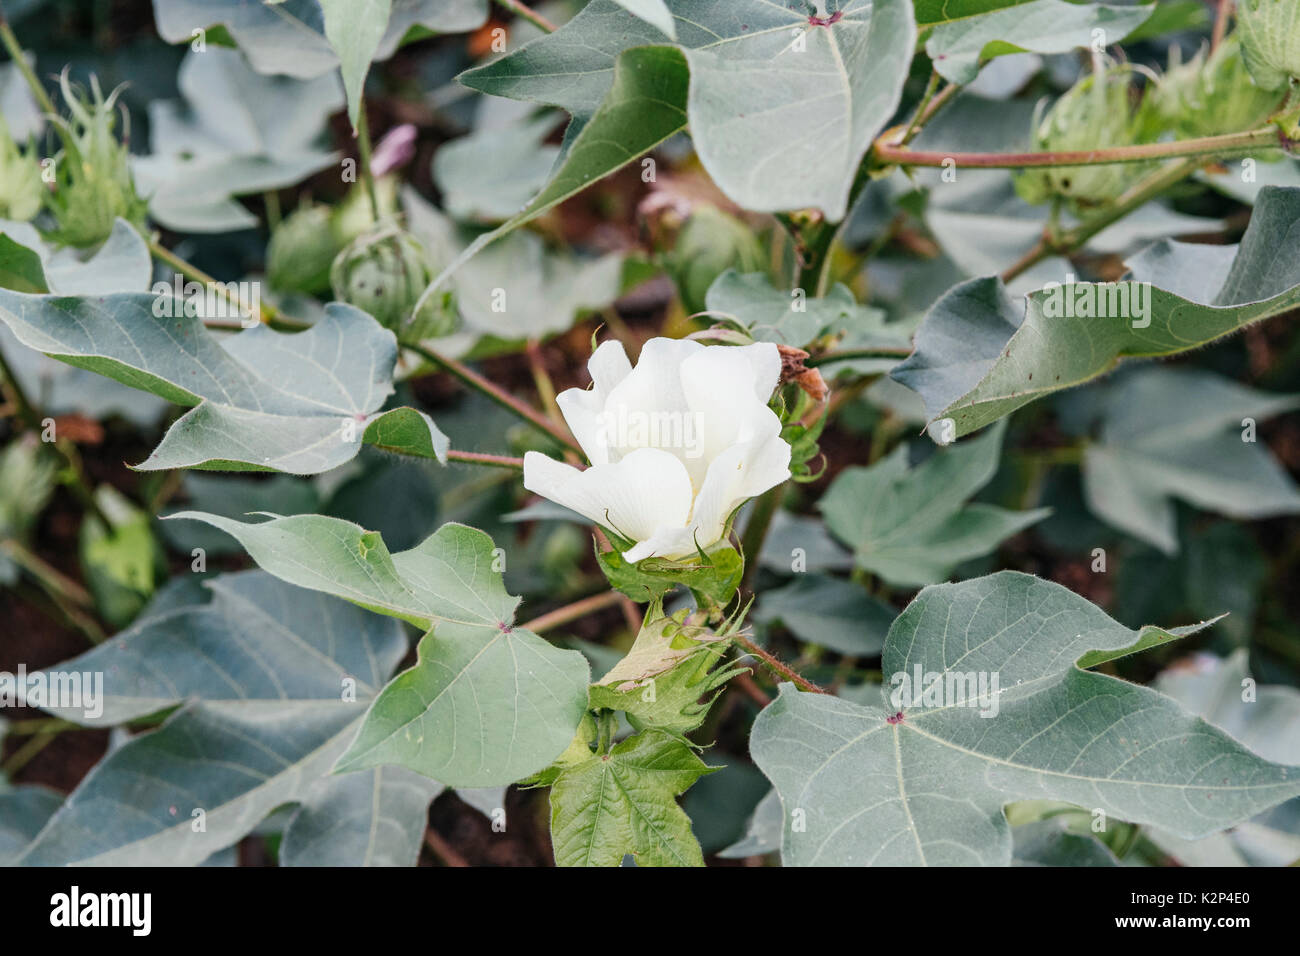 Close up of cotton plant flowering in mid season showing healthy growth for the crop in Shorter, central Alabama, USA. Stock Photo